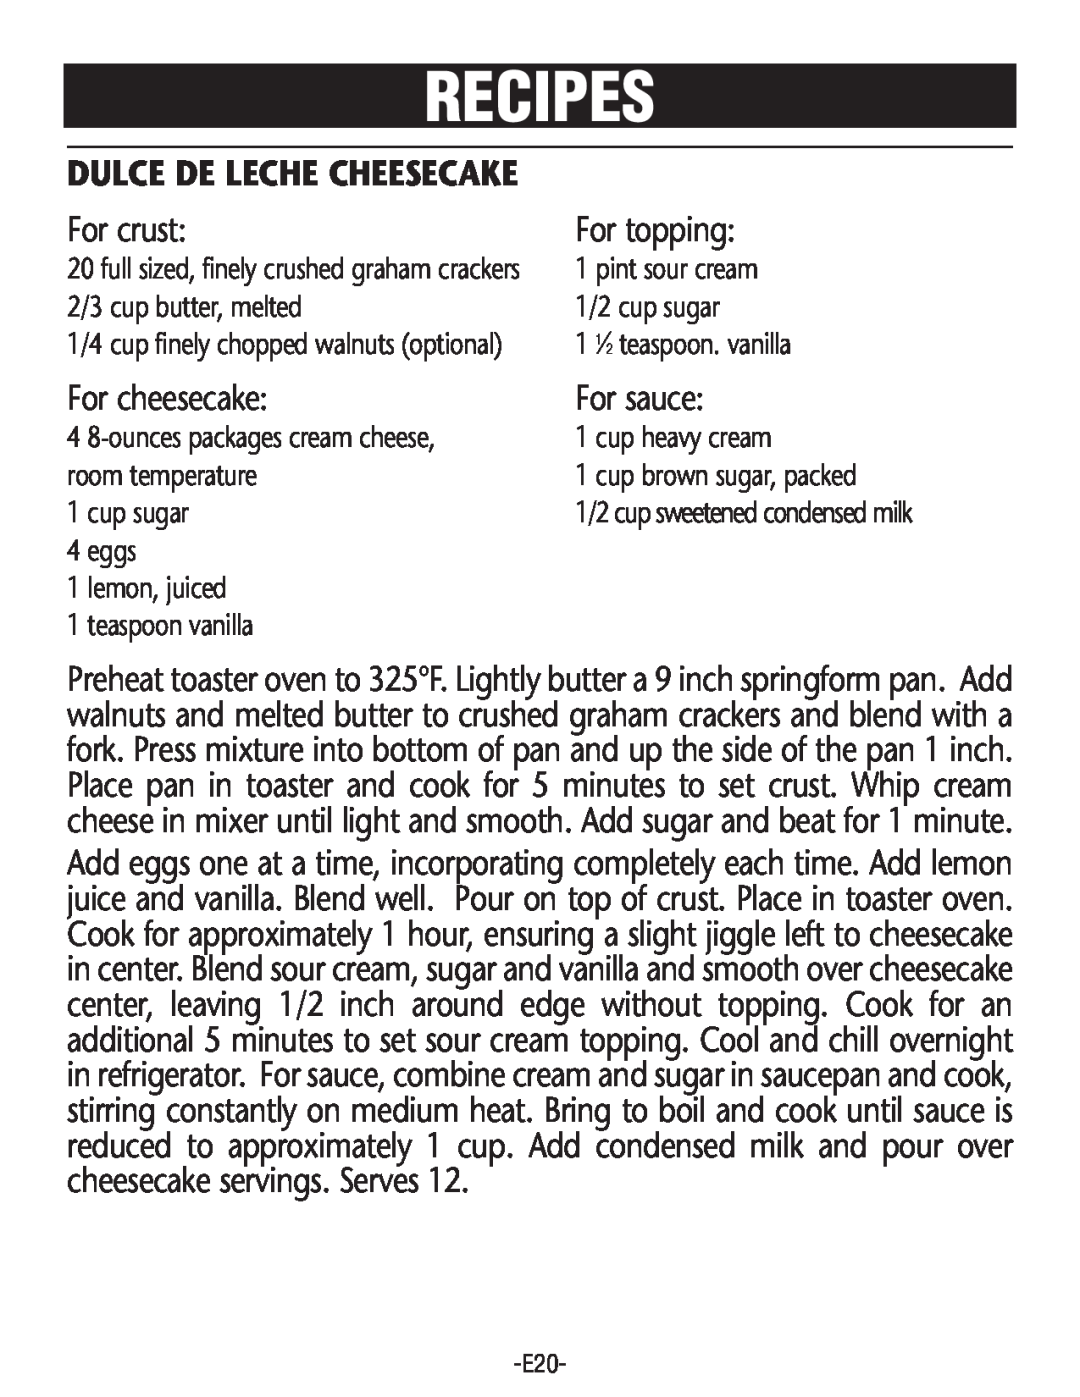 Rival CO602 manual Dulce De Leche Cheesecake, Recipes, For crust, For topping, For cheesecake, For sauce 